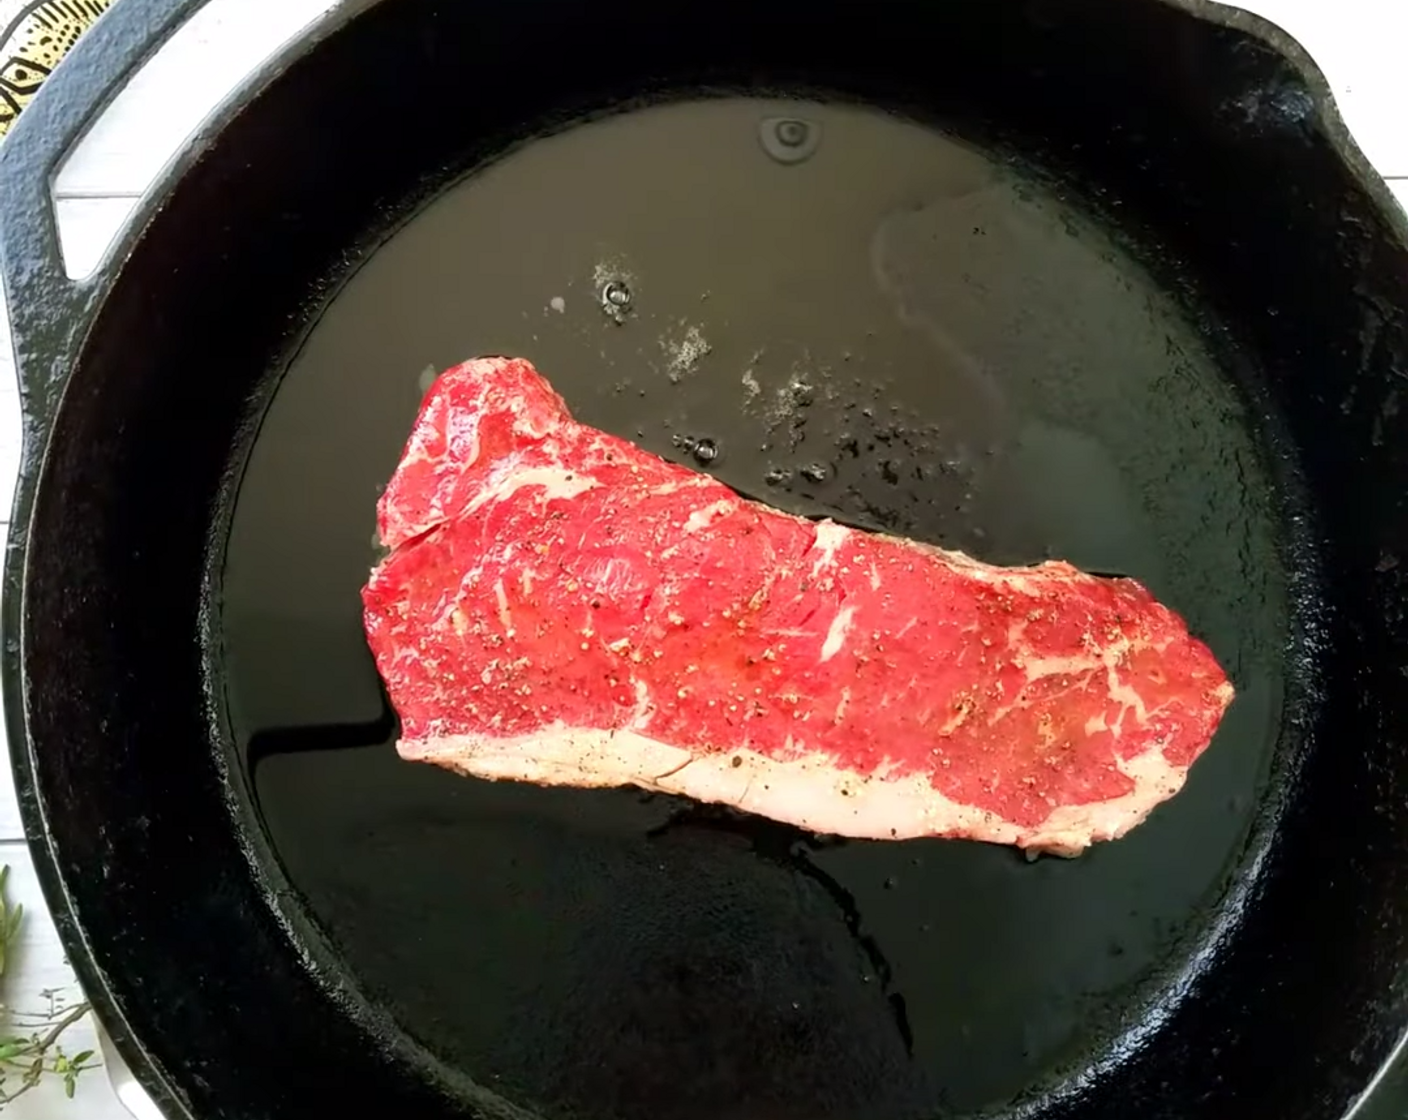 step 3 Heat up the cast iron pan to high temp, add Extra-Virgin Olive Oil (1 Tbsp) and lay the sirloin steak into the pan. Listen for the sizzle. Once you’ve put it in. don’t move it around for at least 3 minutes, then flip it over.